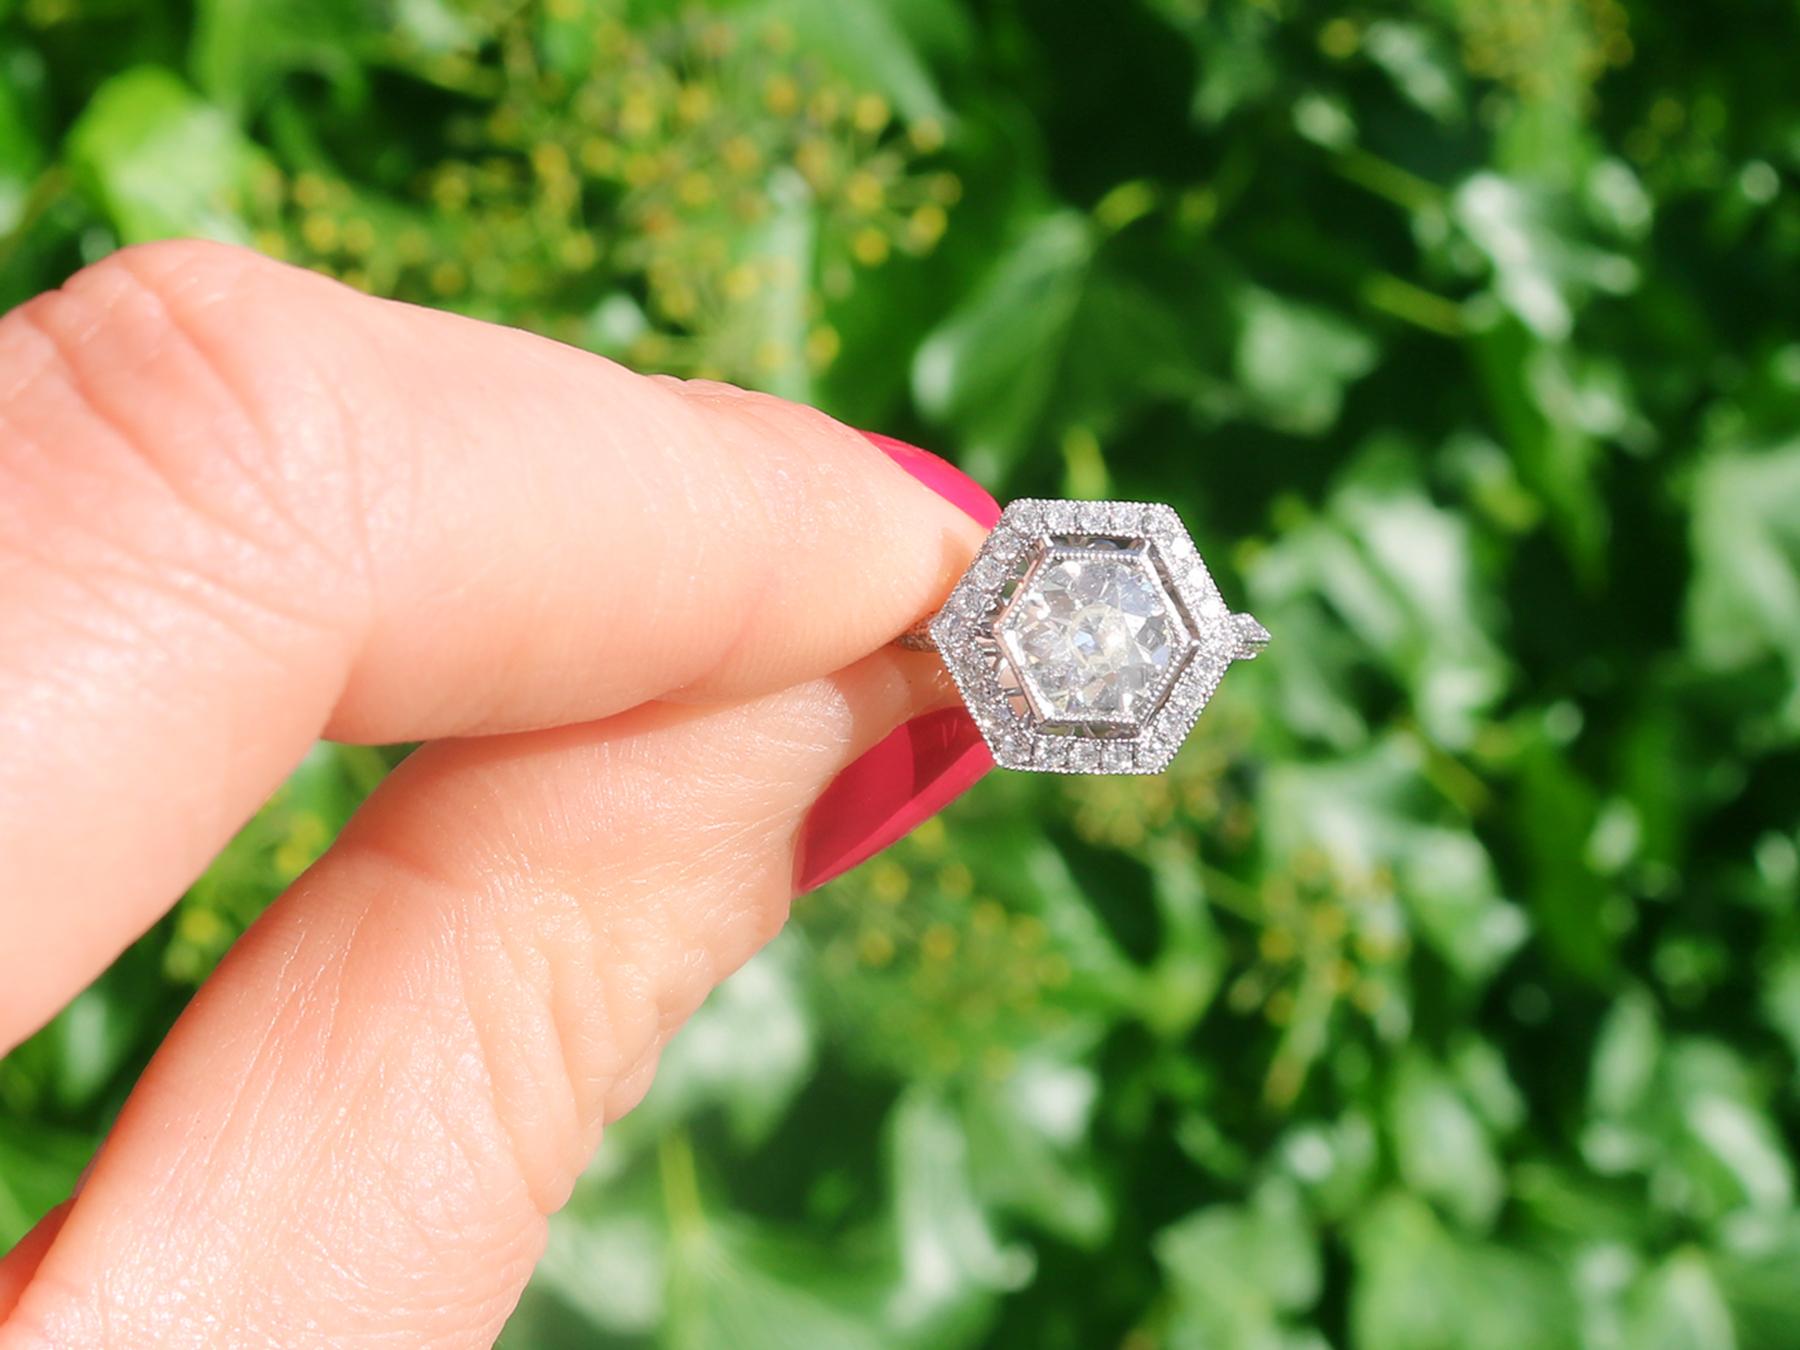 A stunning, fine and impressive antique 1.57 carat diamond and contemporary platinum engagement ring; part of our diverse diamond jewelry and estate jewelry collections.

This stunning, fine and impressive halo diamond engagement ring has been